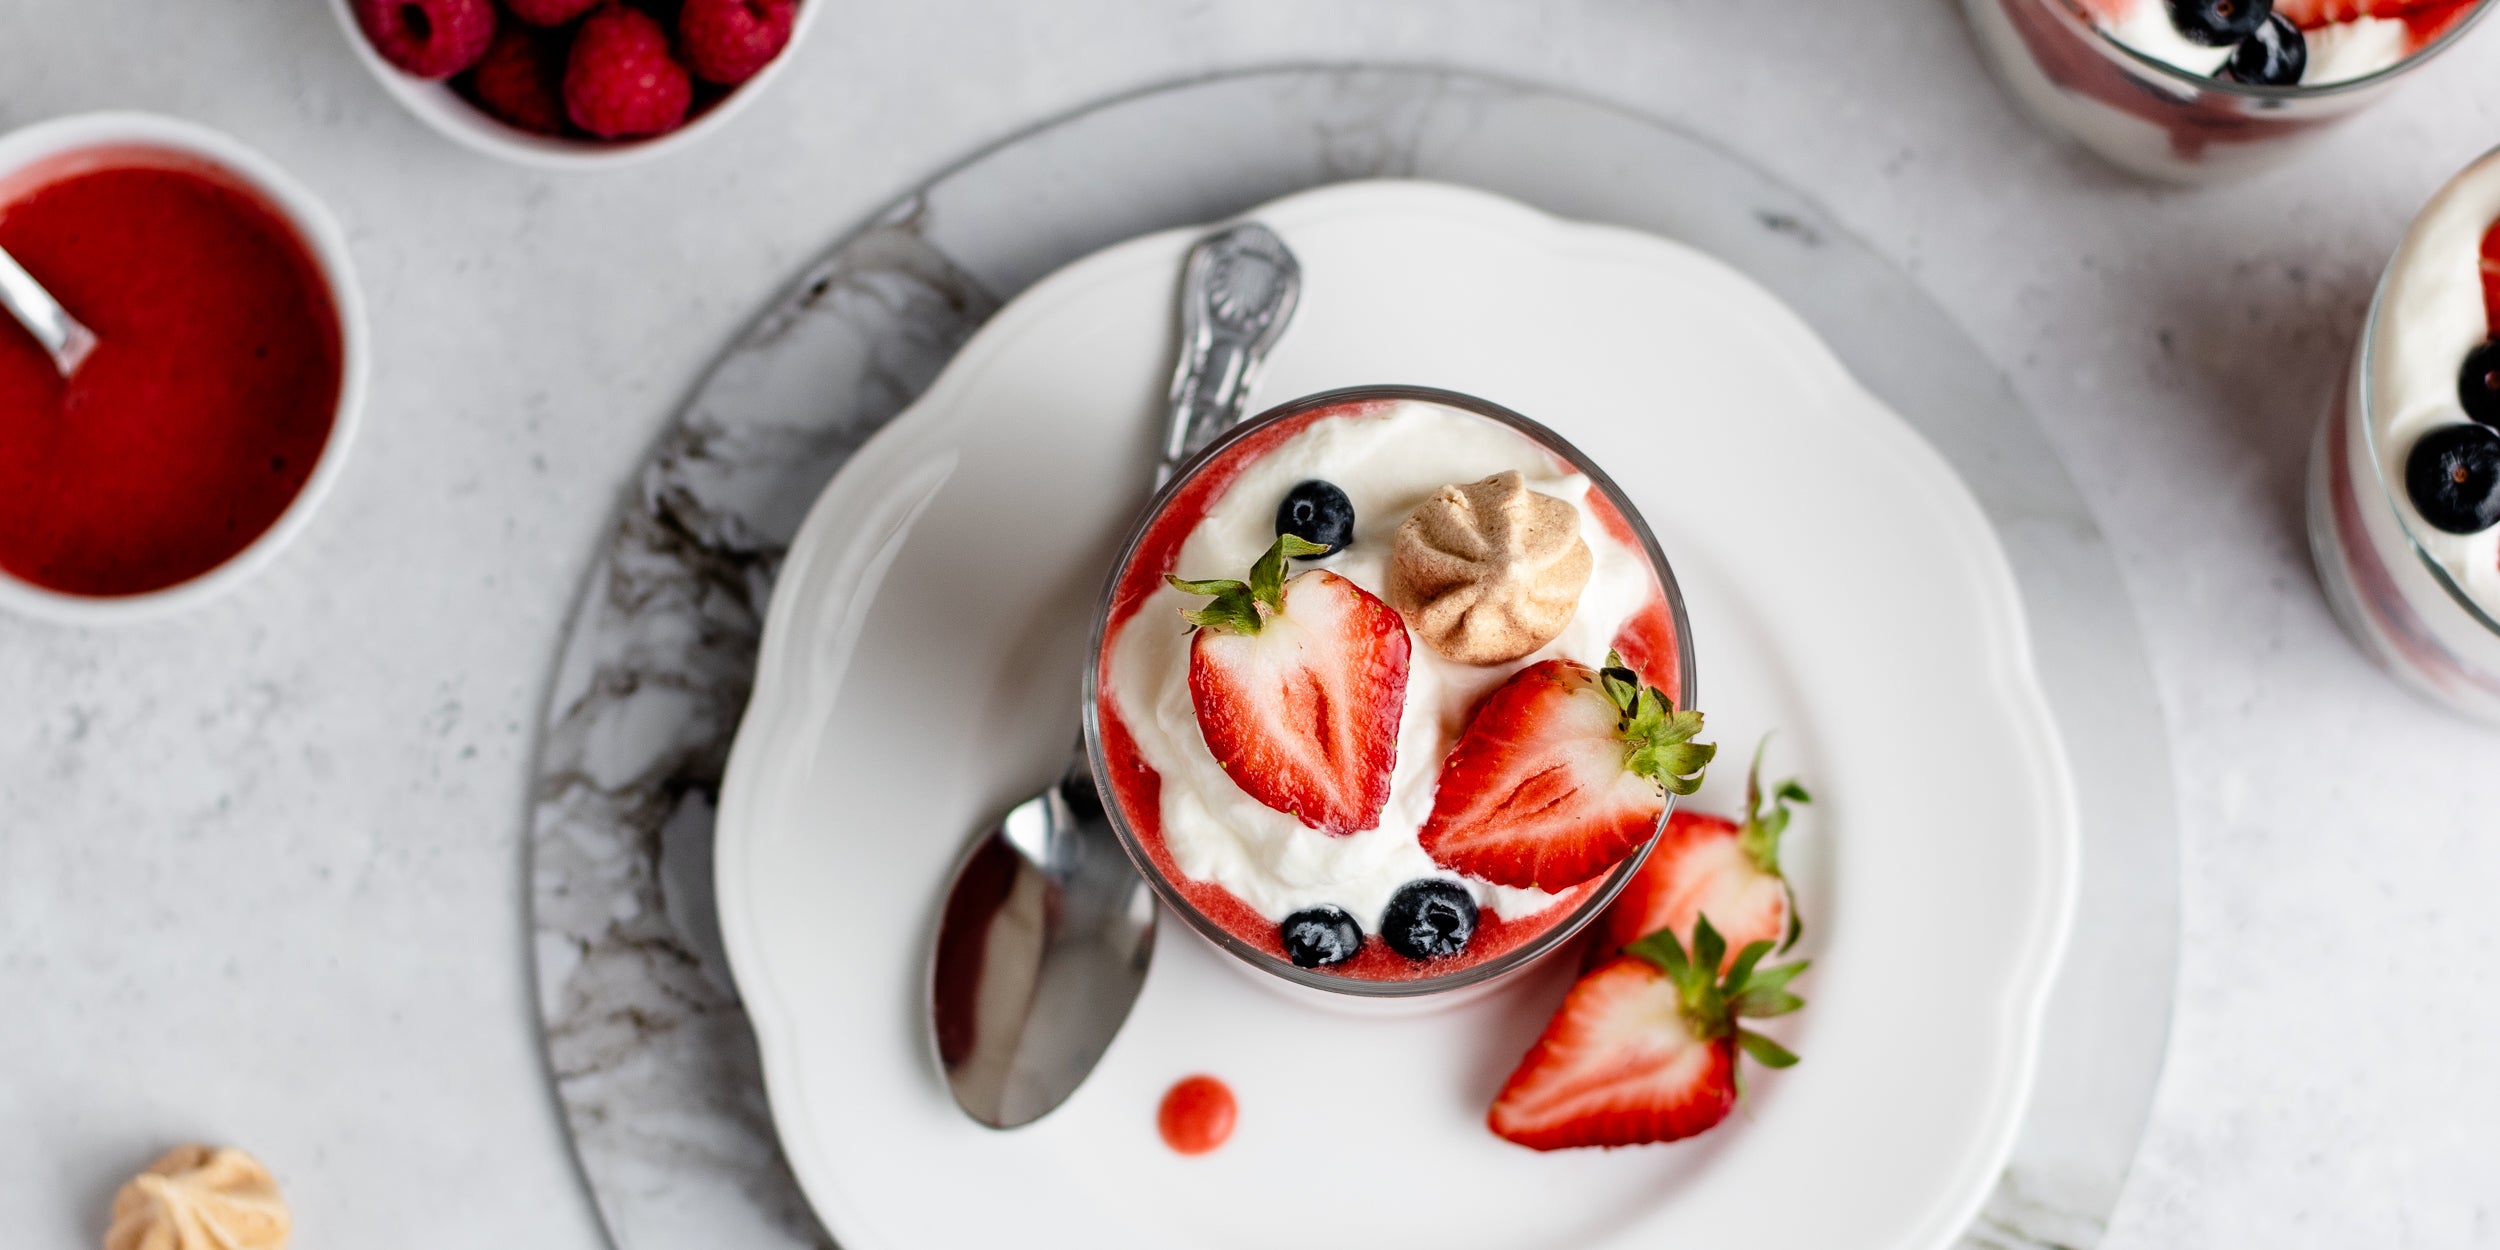 Top view of Summer Berry Eton Mess garnished with fresh sliced strawberry and meringues